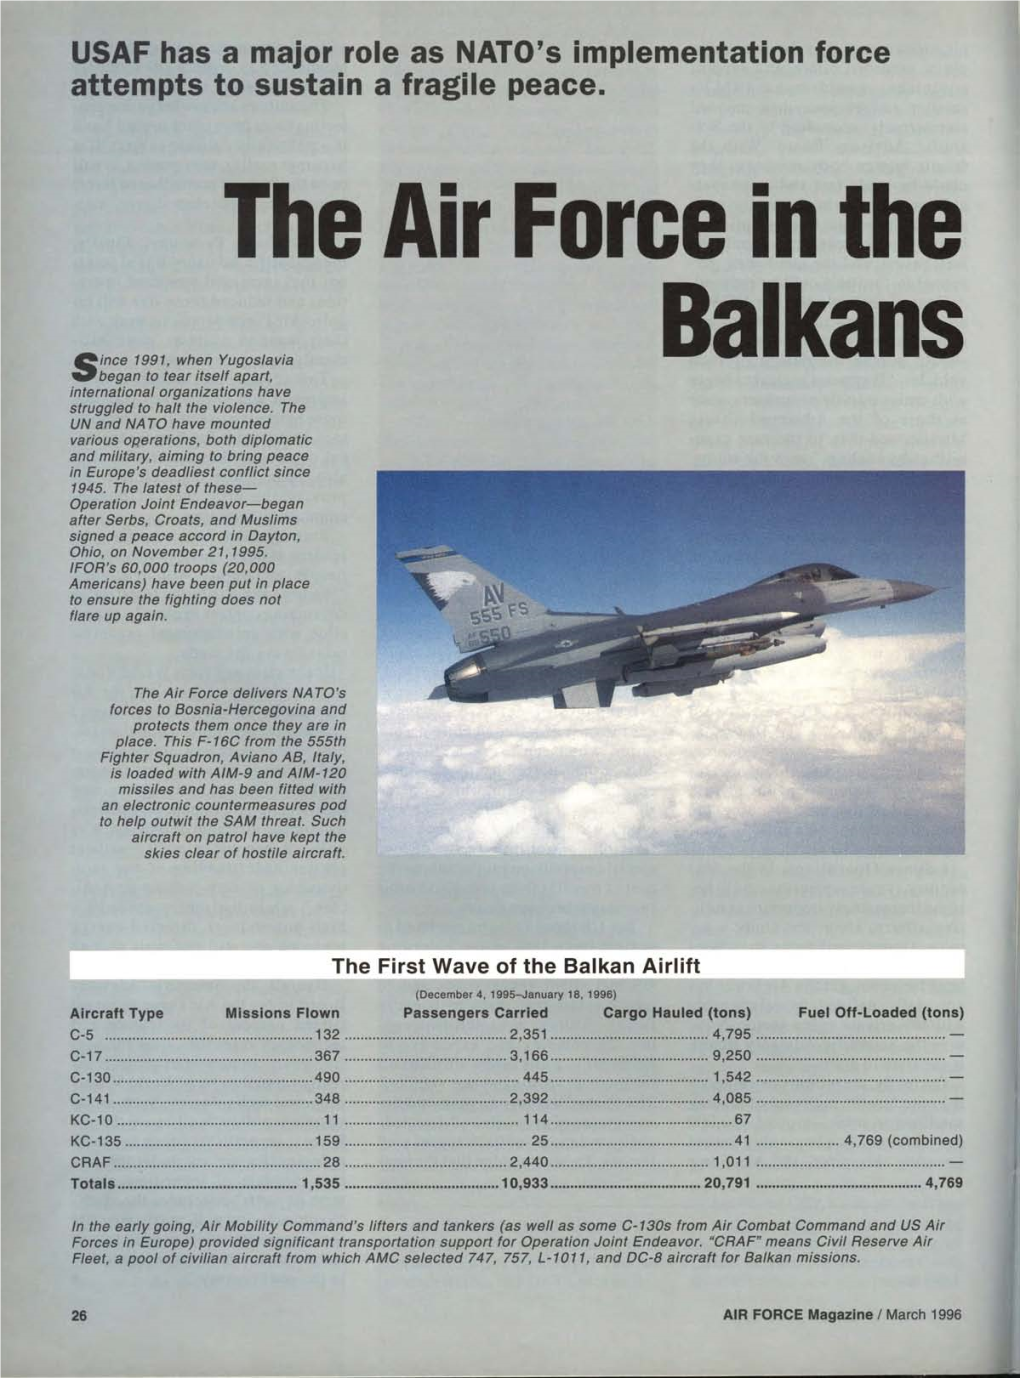 The Air Force in the Balkans